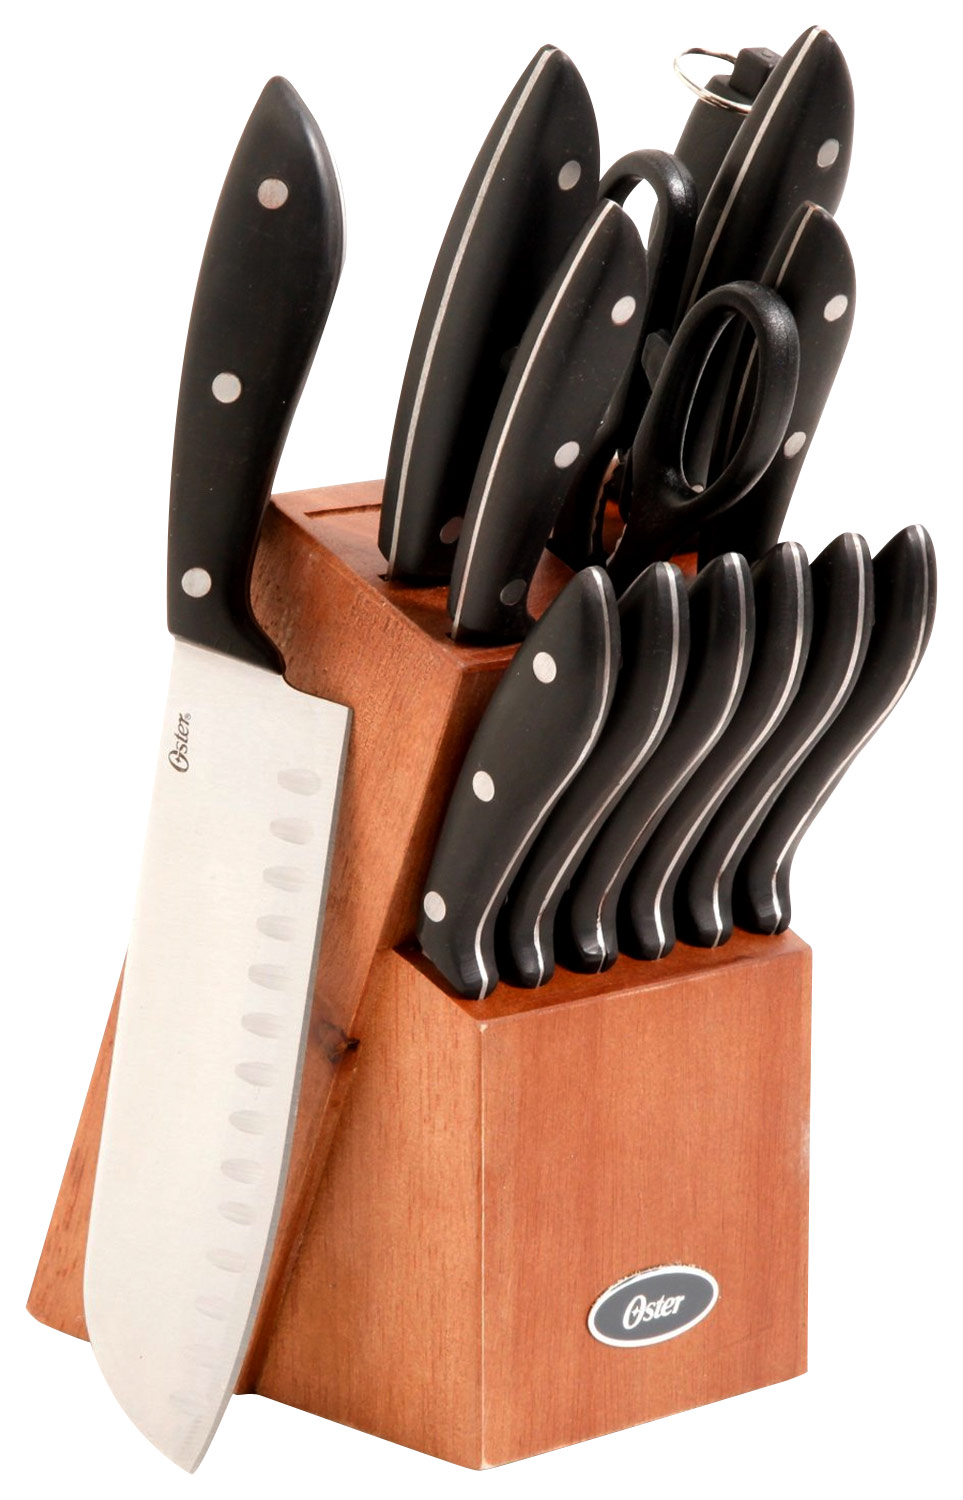 Oster Huxford 14-Piece Stainless-Steel Knife Set Black 91586278M - Best Buy